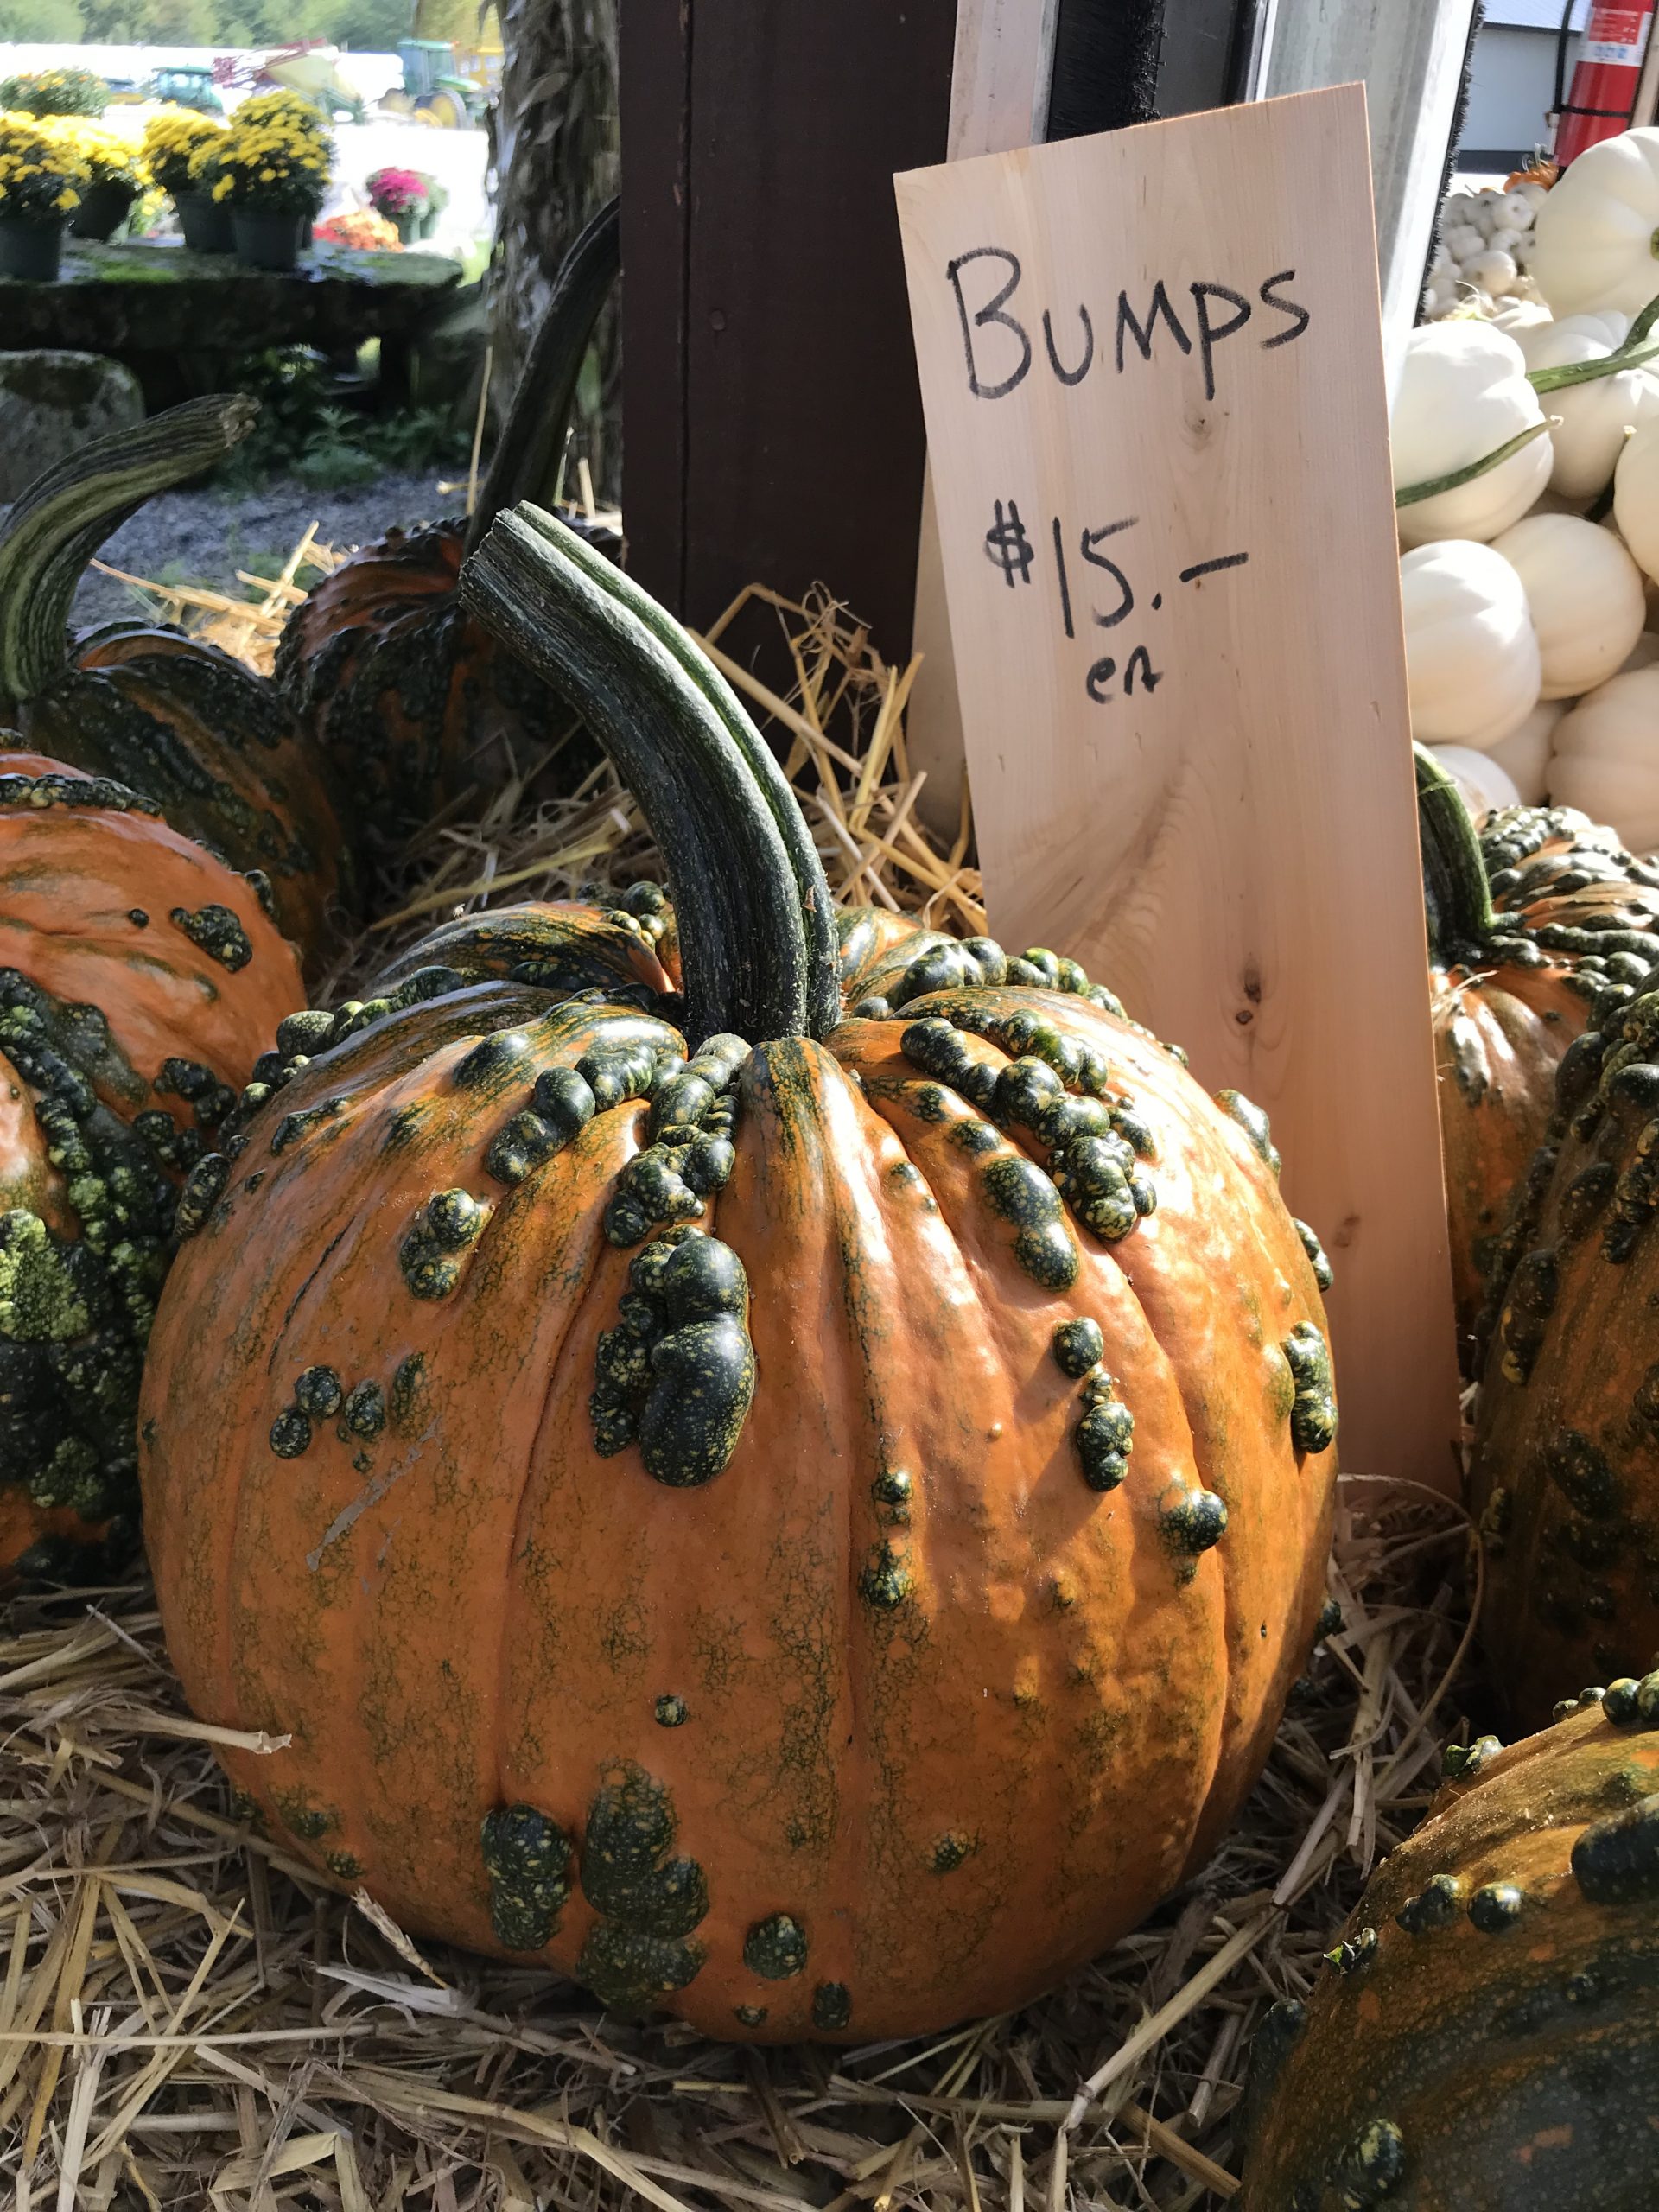 What’s The Most You’ve Ever Paid For A Pumpkin?